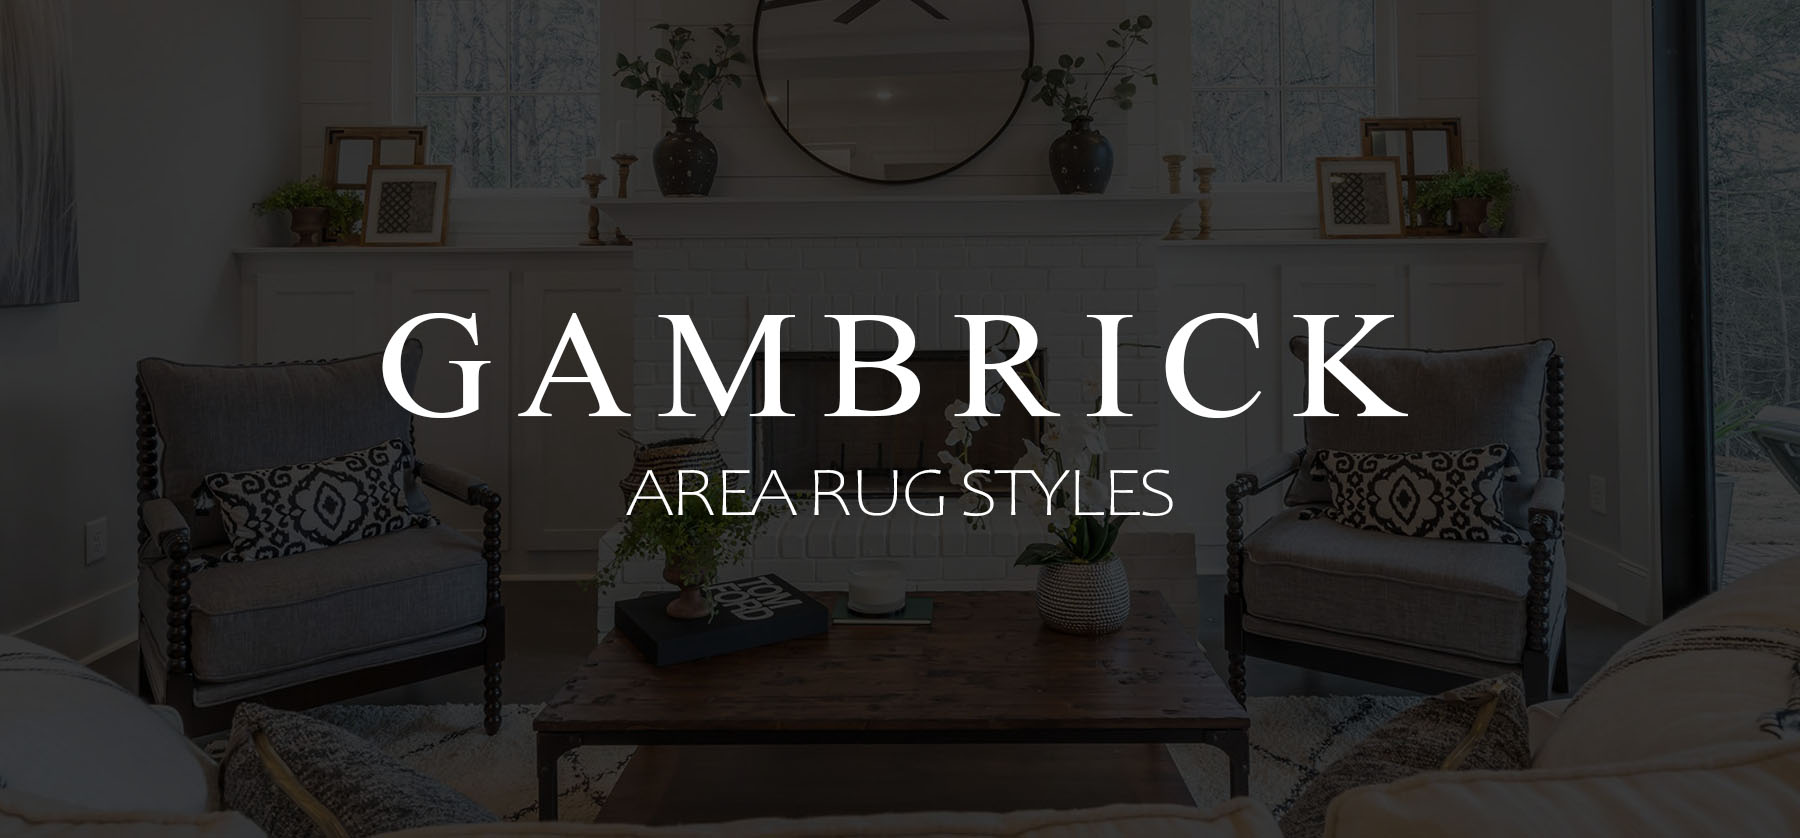 area rug styles banner 1